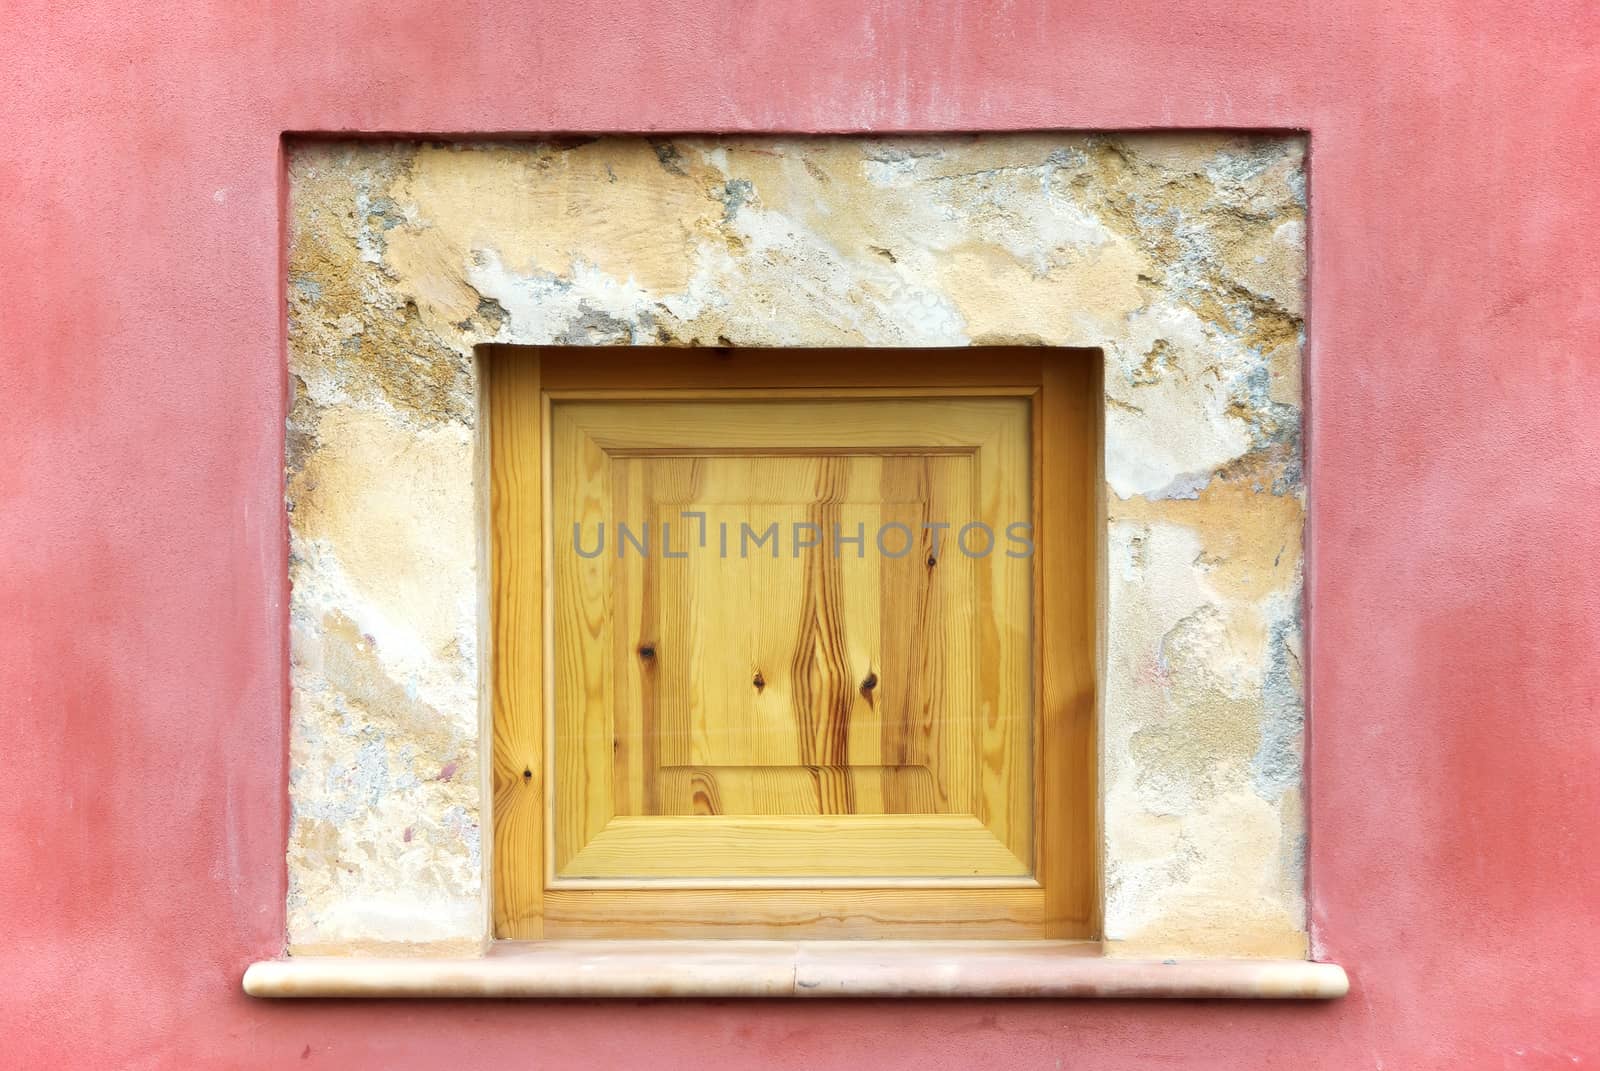 Detail of a Wooden Window on an old pink wall